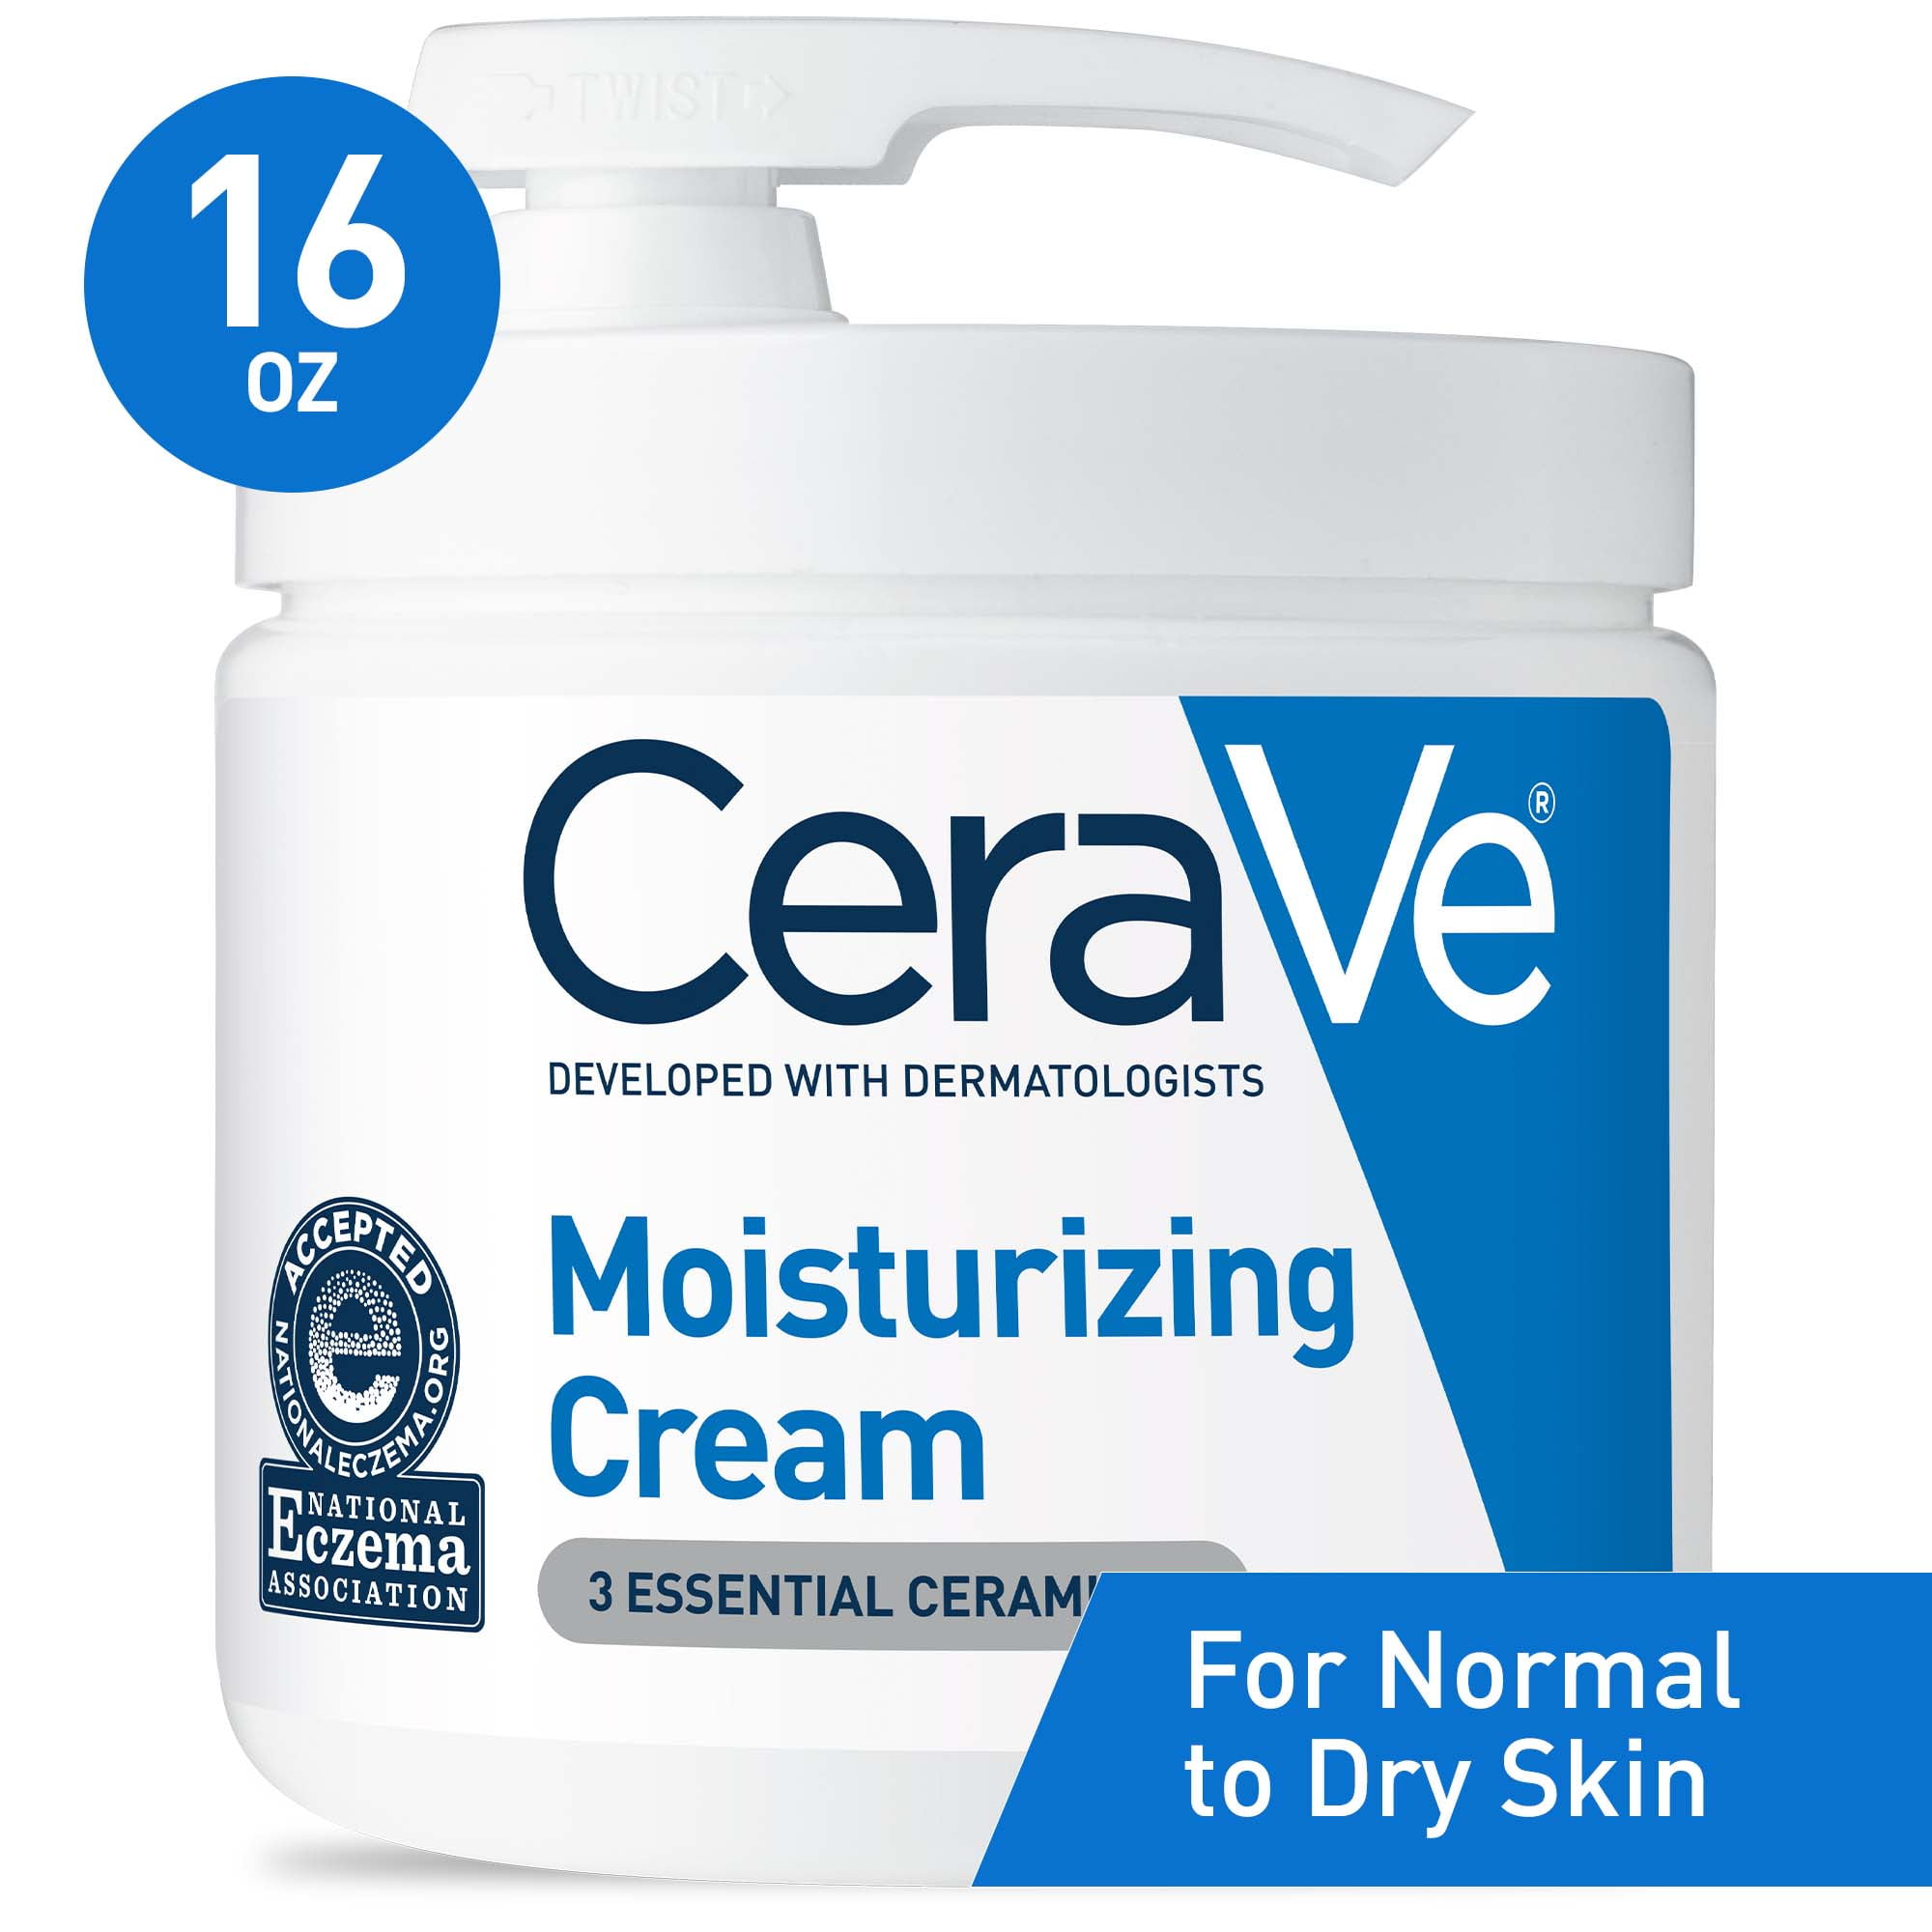 CeraVe Moisturizing Cream for Face and Body, Daily Moisturizer for Normal to Dry Skin with Pump, 16 oz.